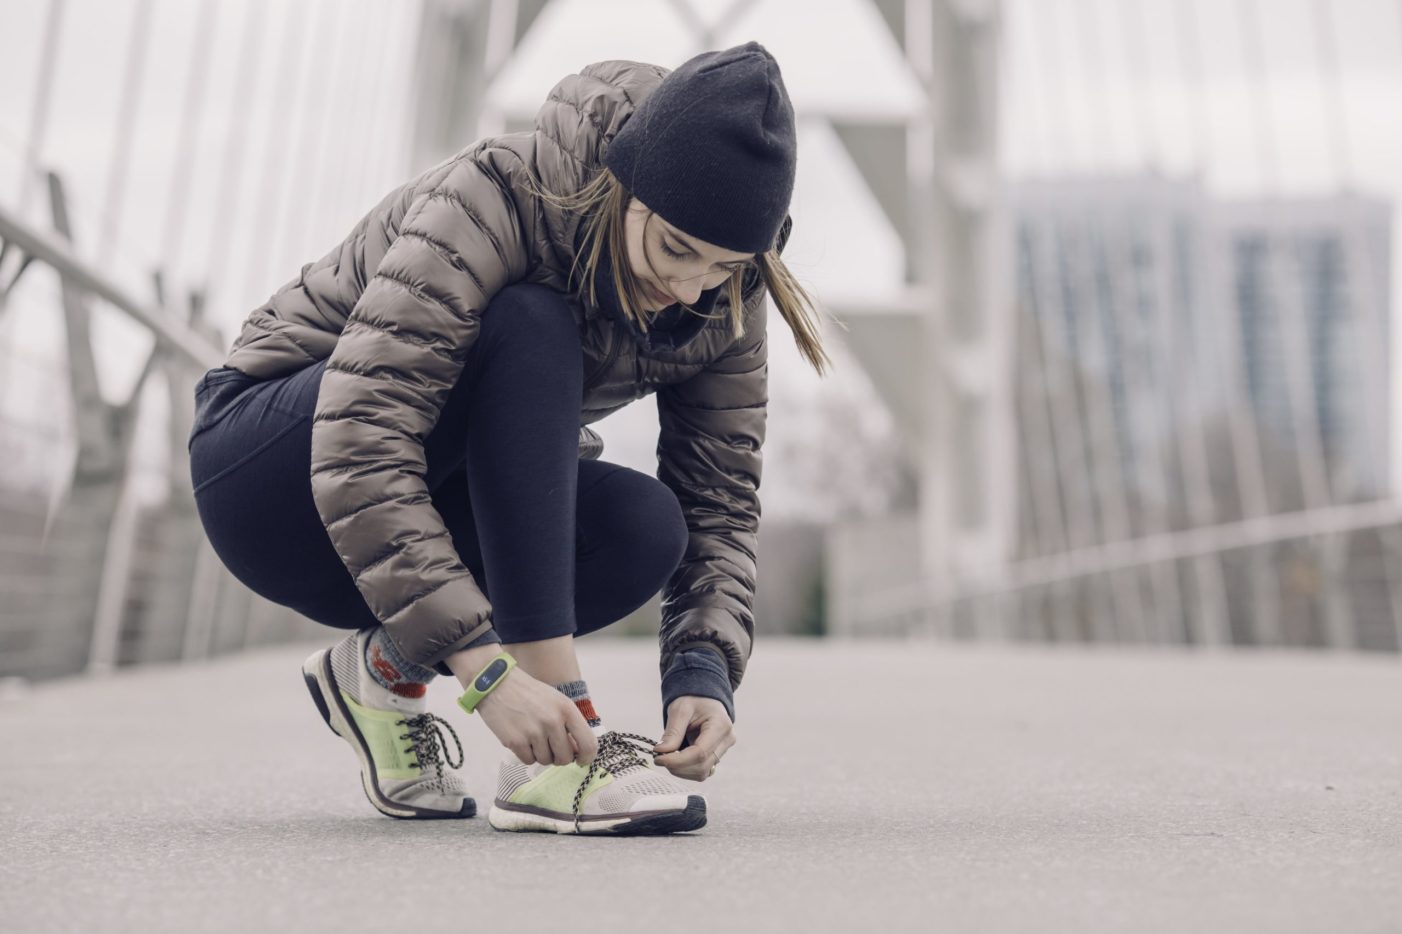 HOW TO PREPARE FOR WINTER RUNNING?